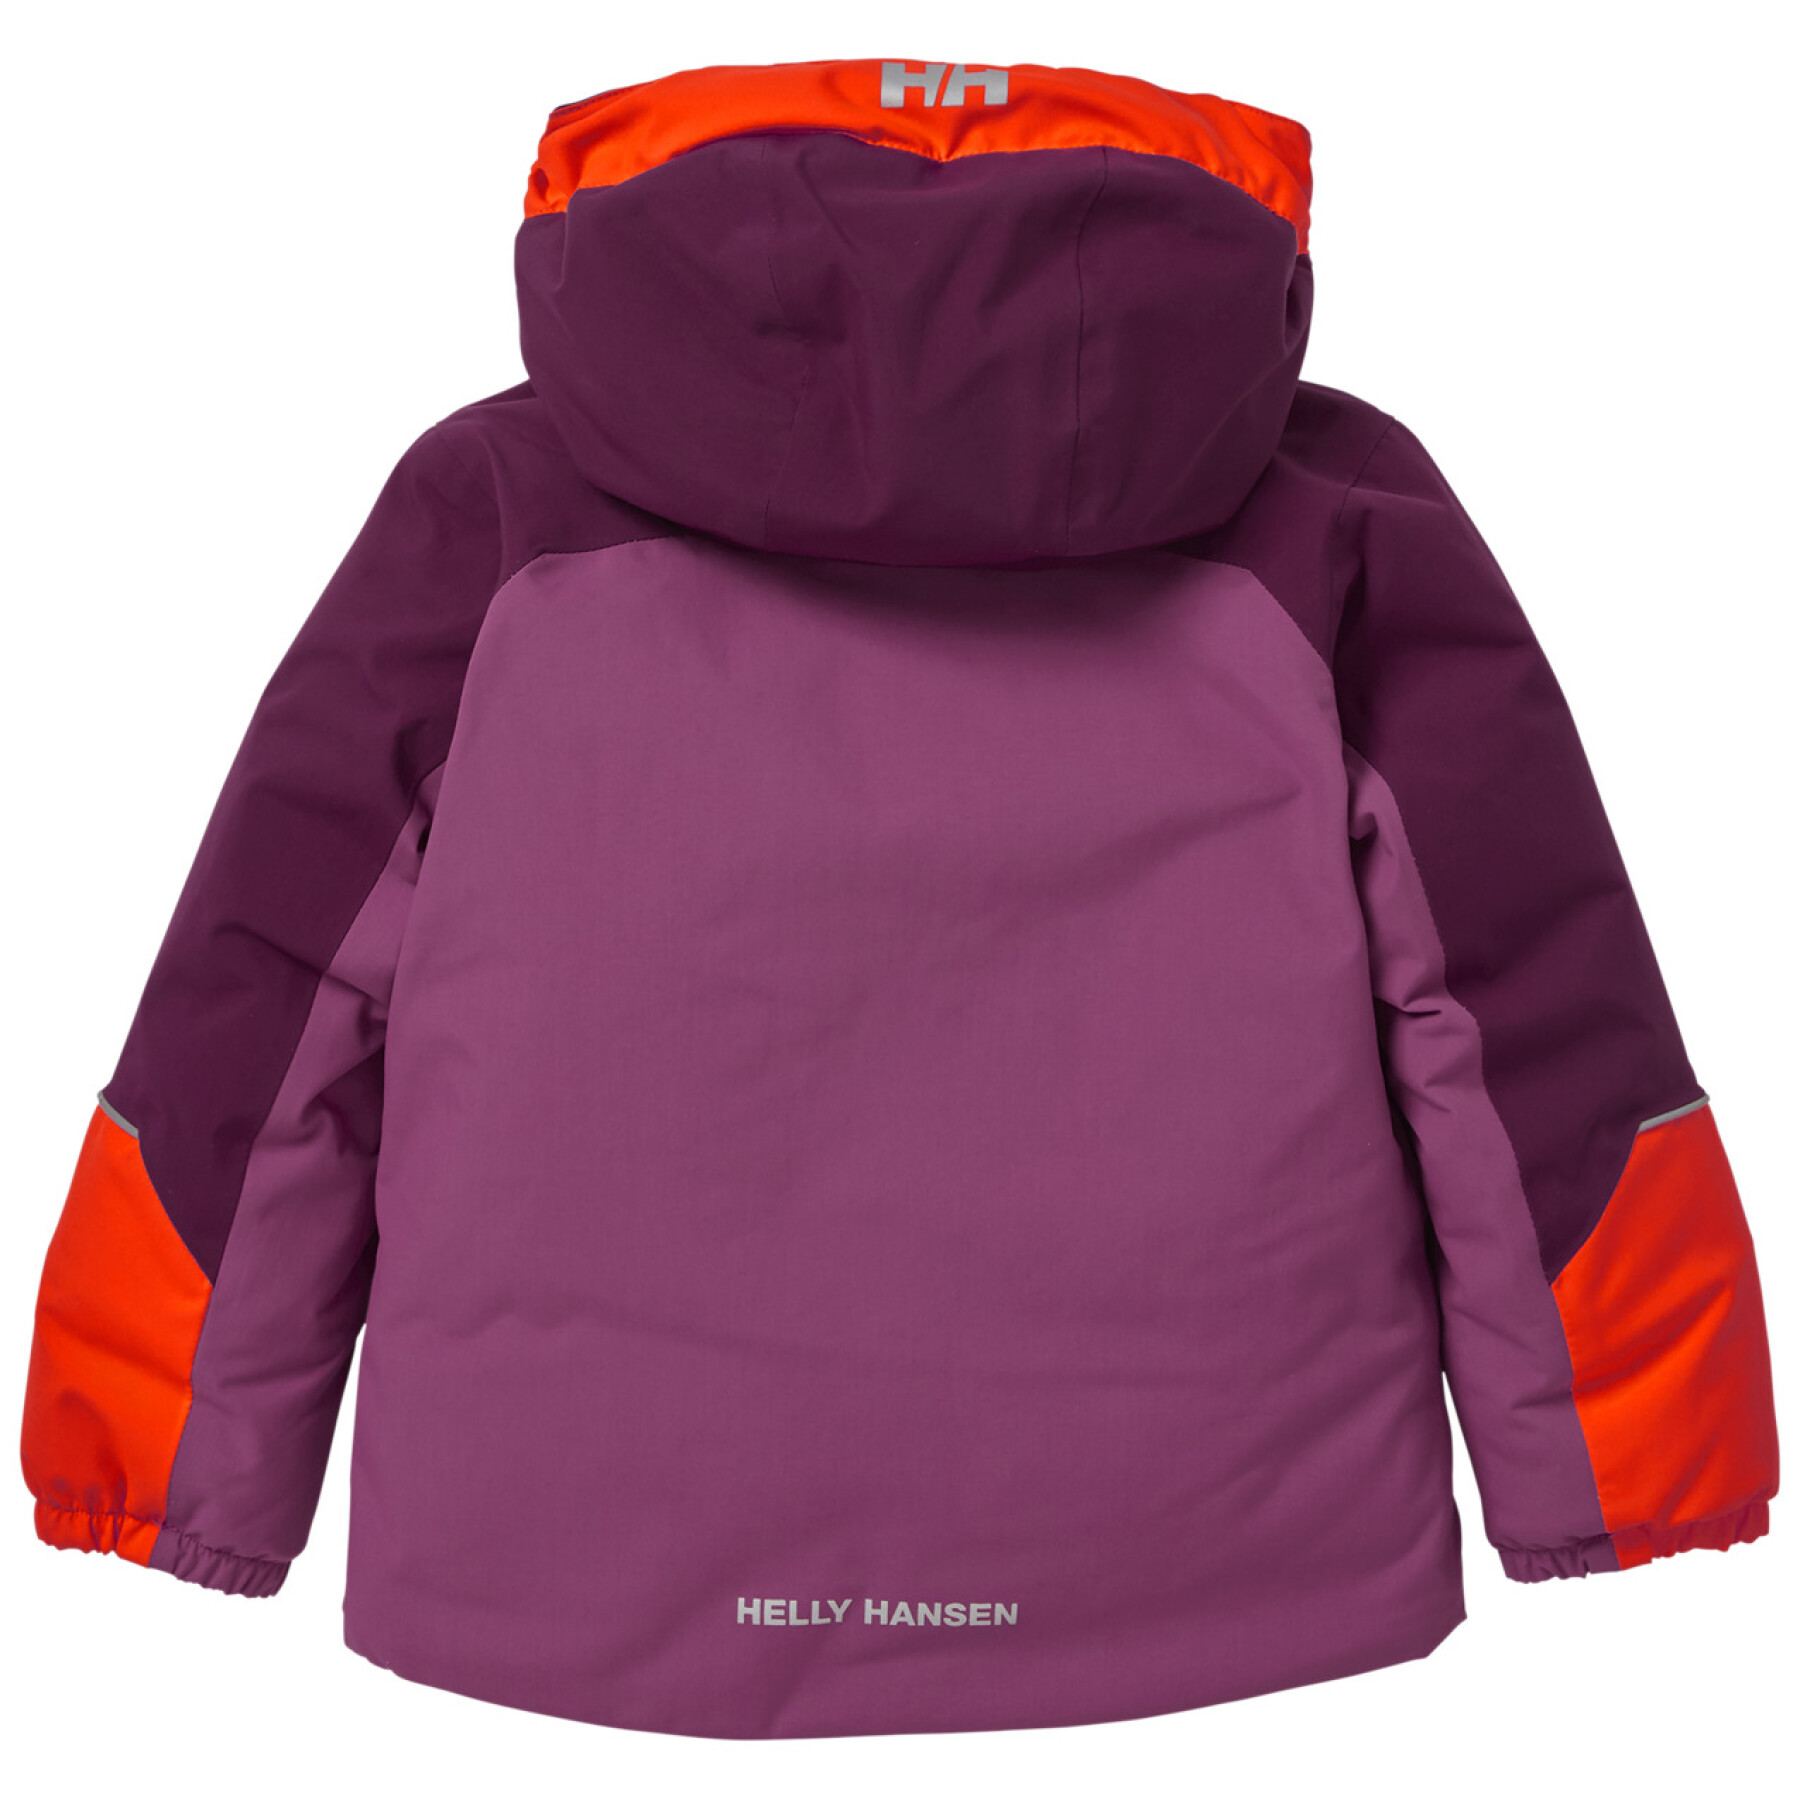 Giacca impermeabile per bambini Helly Hansen Tinden ins